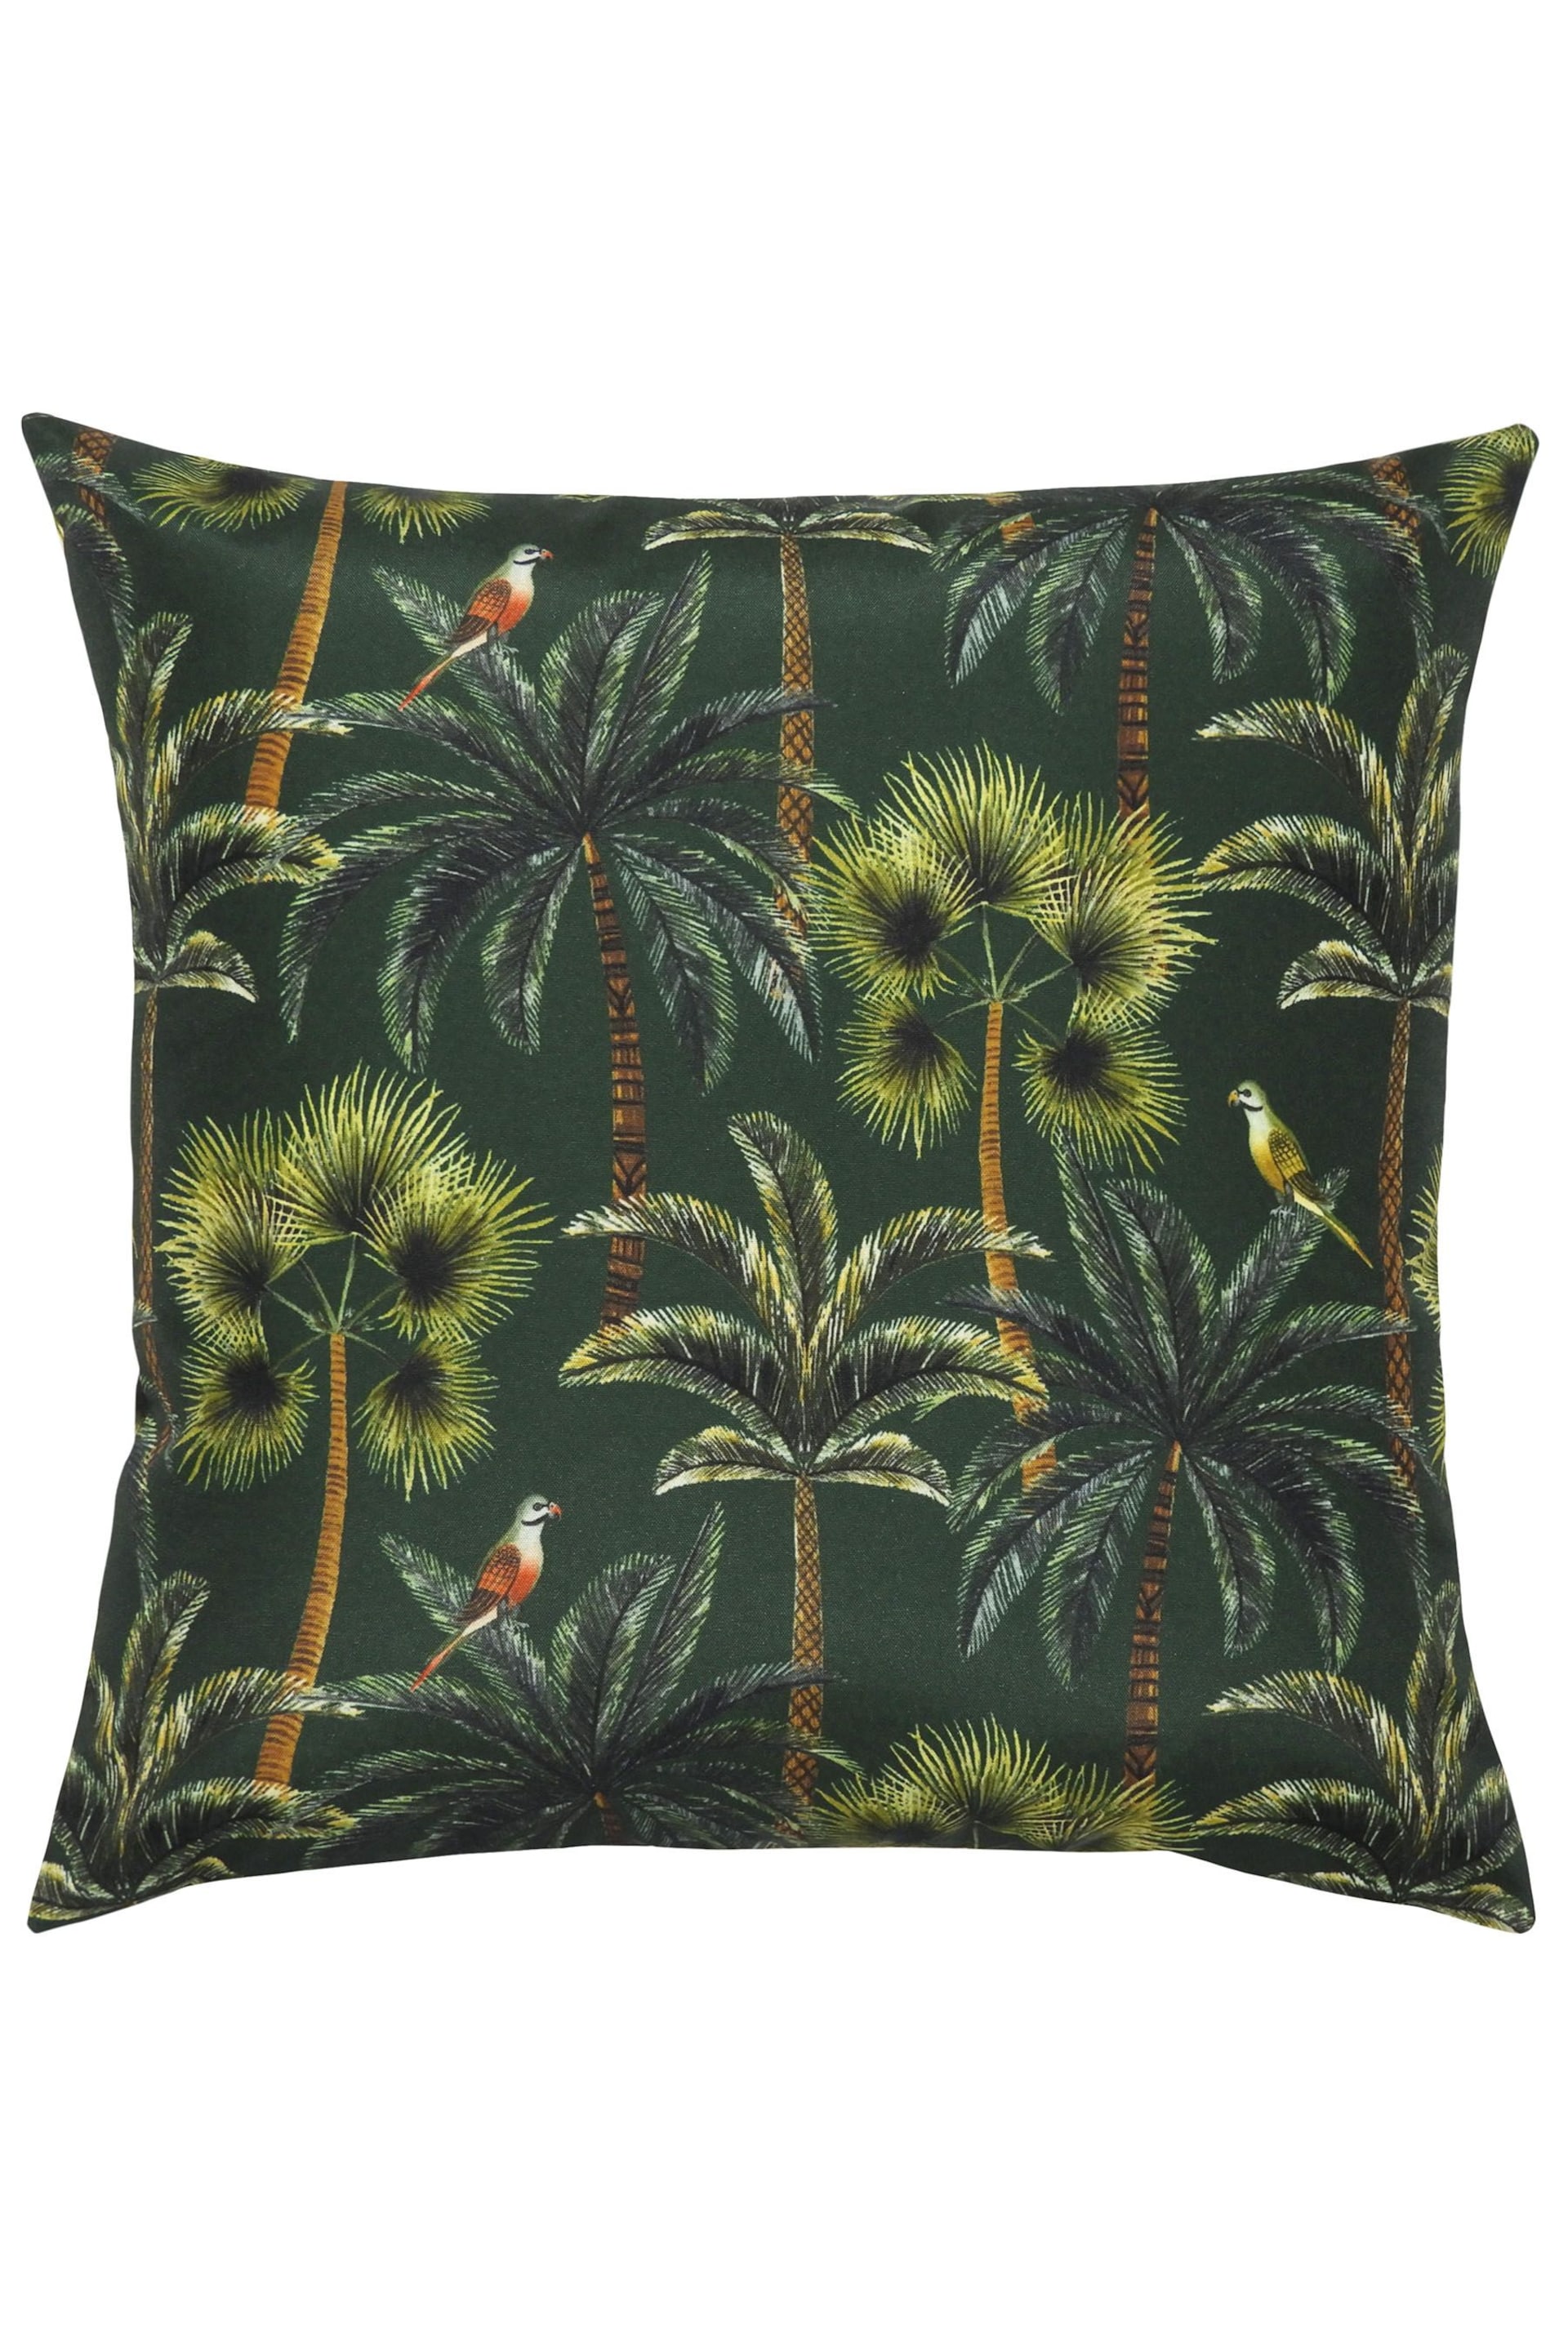 Evans Lichfield Forest Green Palms Outdoor Polyester Filled Cushion - Image 2 of 5